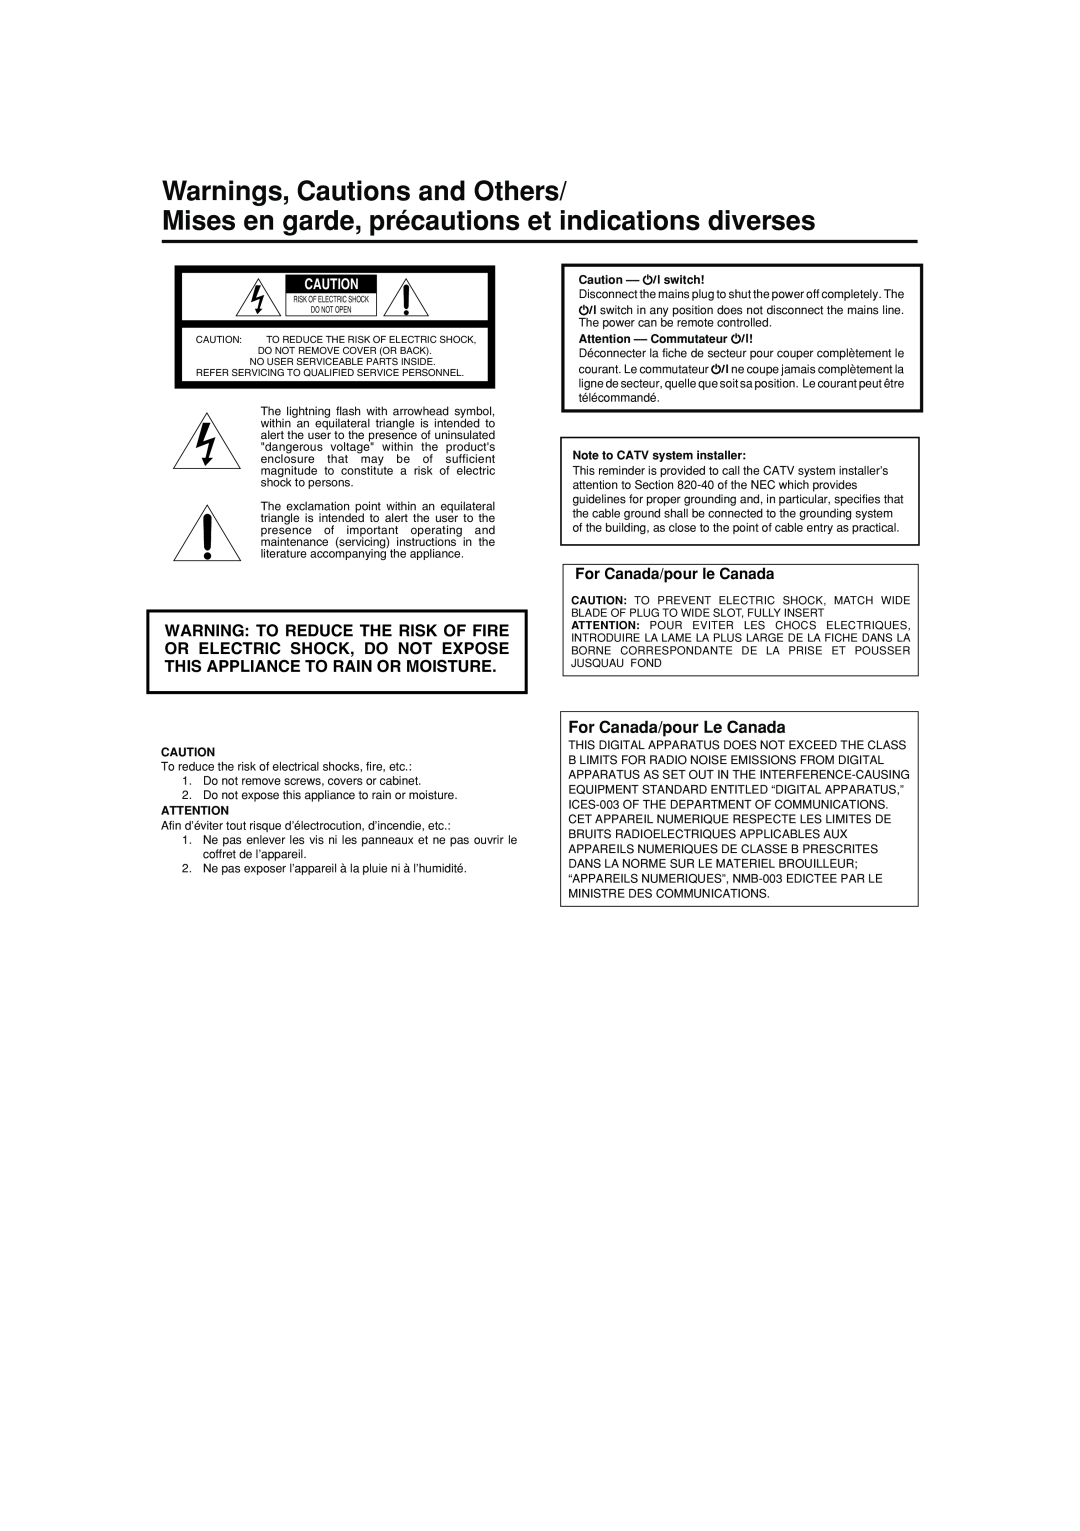 JVC RX-ES1SL manual Warnings, Cautions and Others, For Canada/pour Le Canada, For Canada/pour le Canada, Caution –– switch 